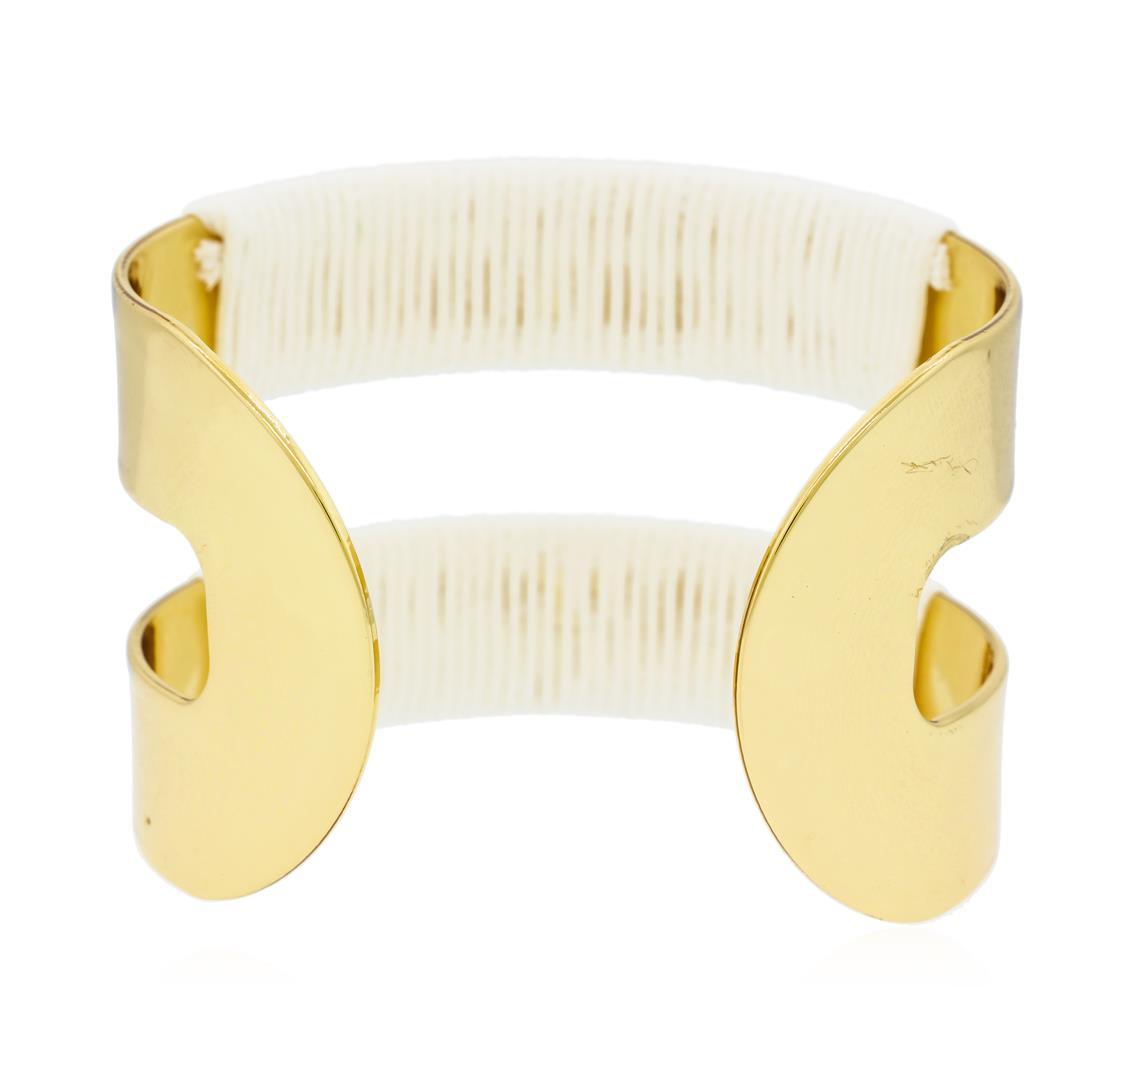 Double Metal Strand Leather Cuff Bracelet - Gold Plated